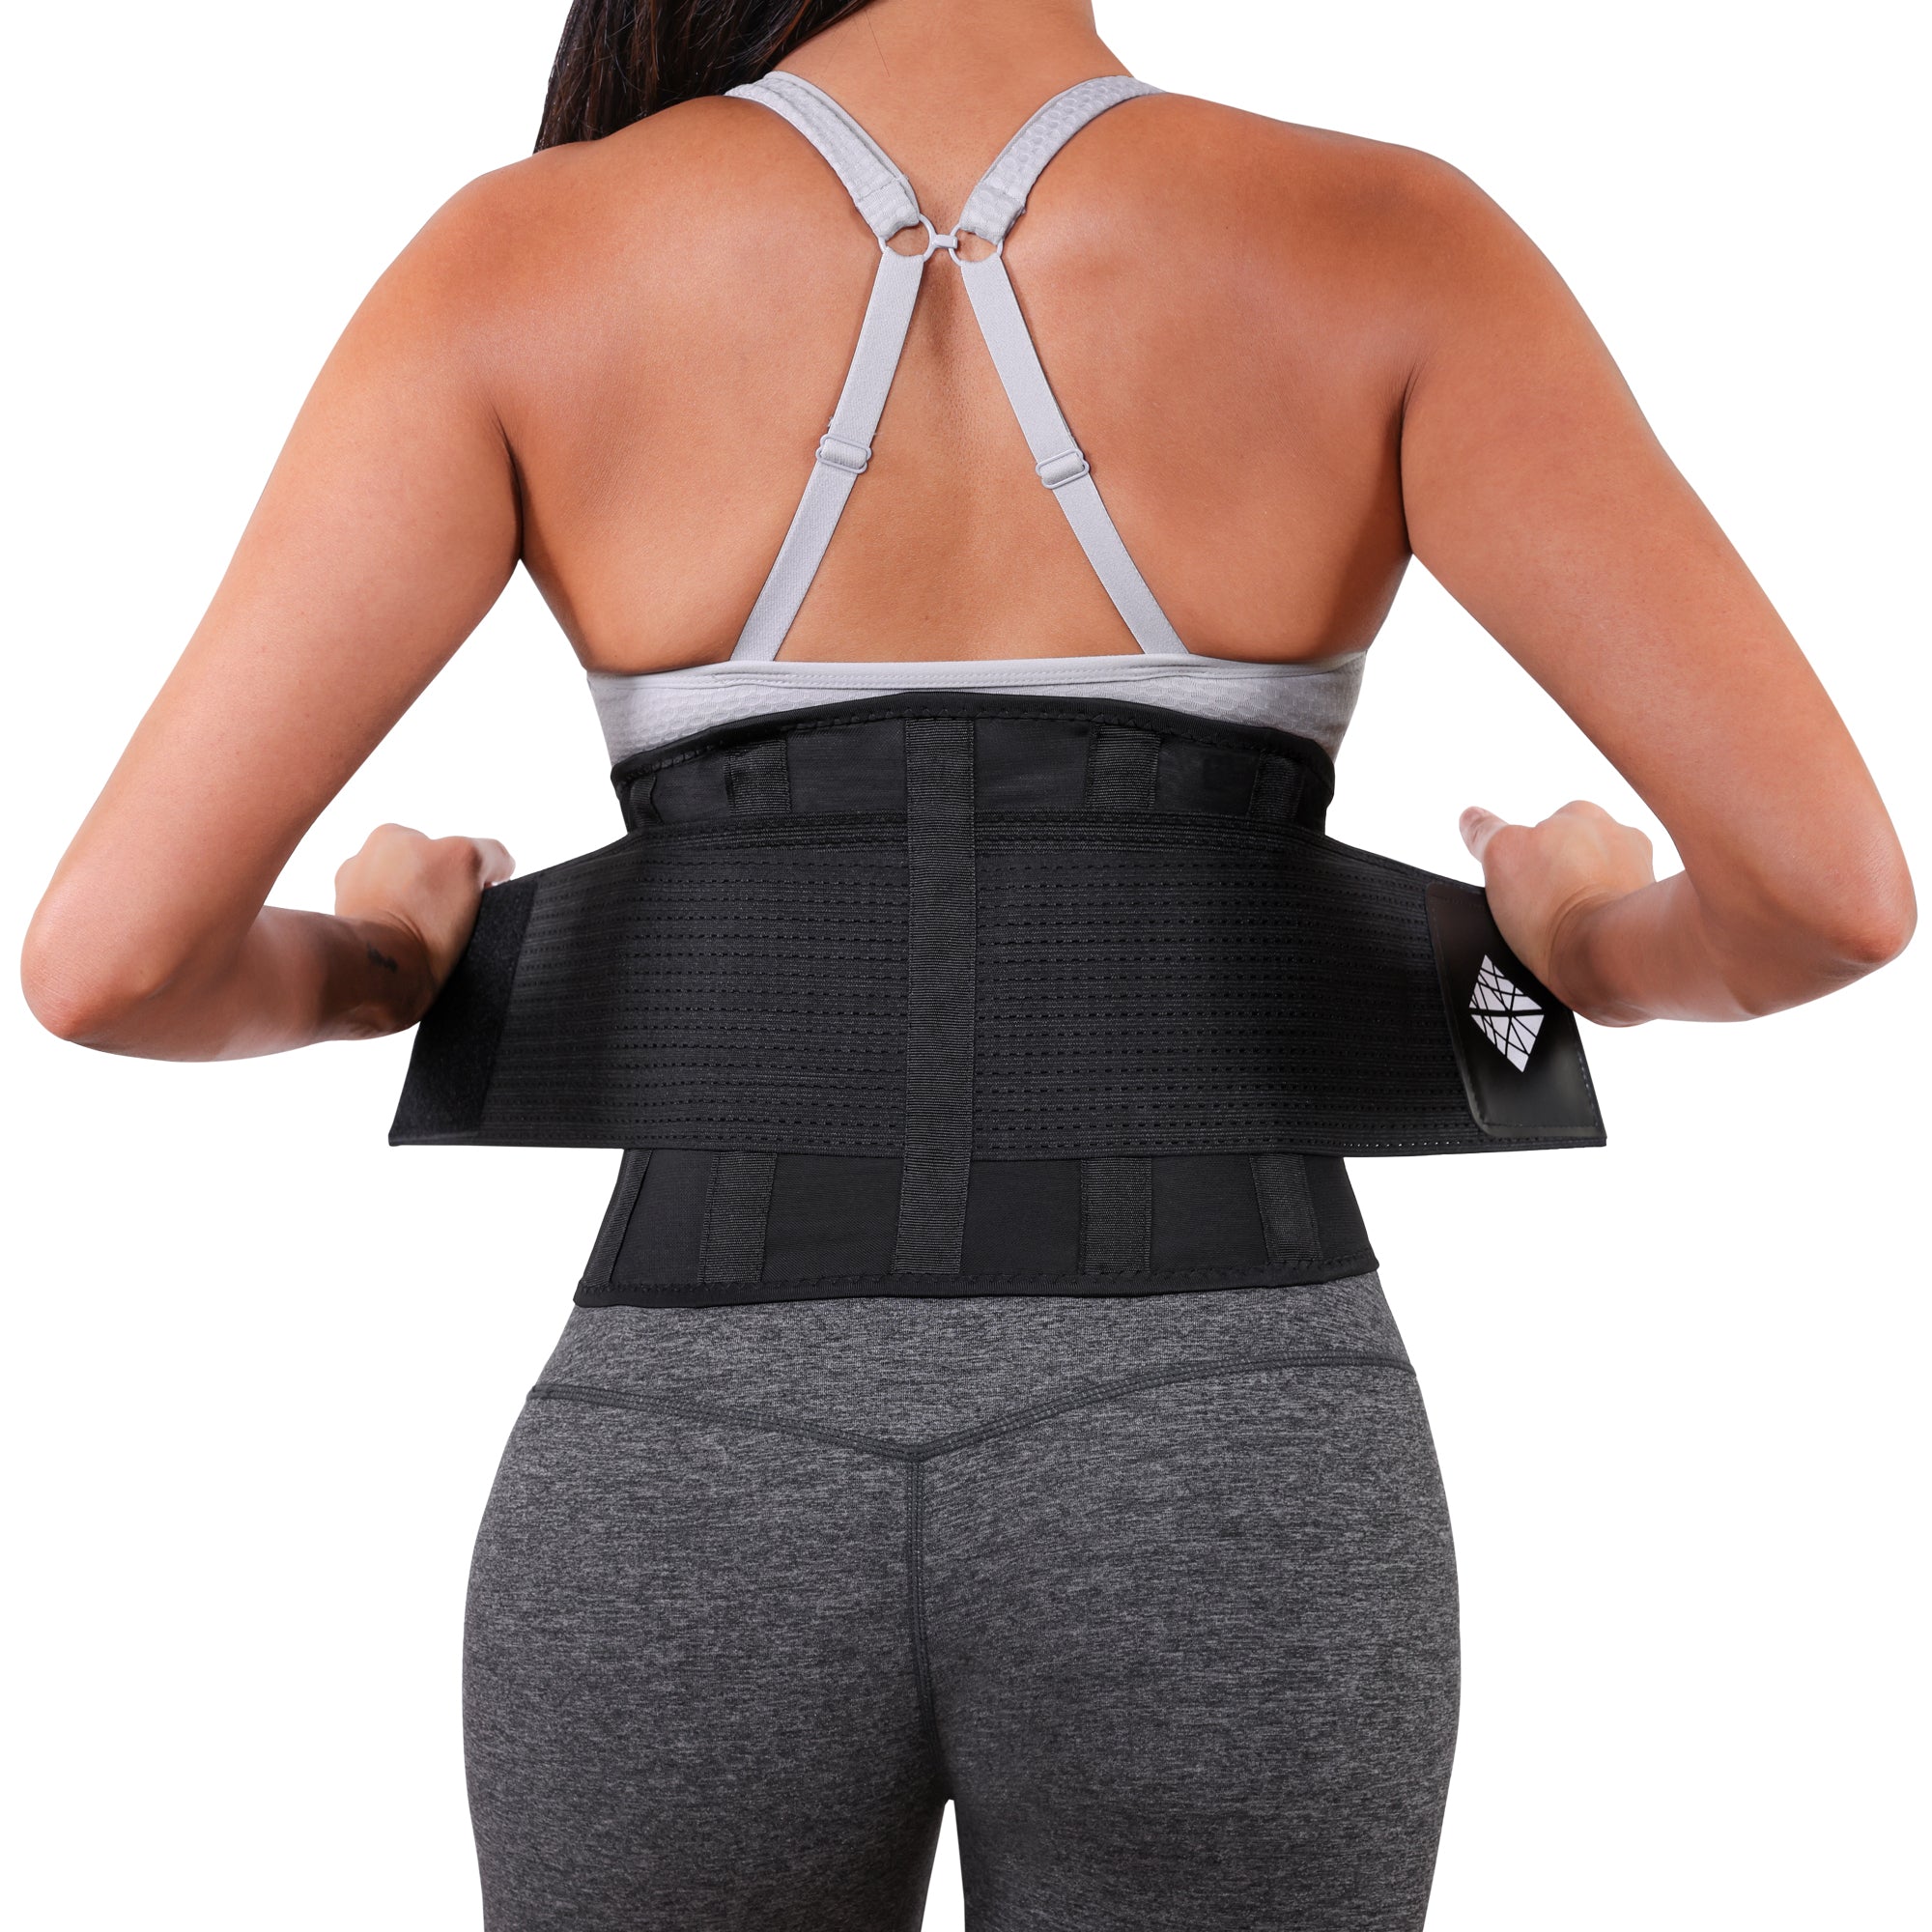 Lower Back Brace with Suspenders, Lumbar Support, Wrap for Posture  Recovery, Workout, Herniated Disc Pain Relief, Waist Trimmer Work Ab Belt, Industrial, Adjustable, Women & Men